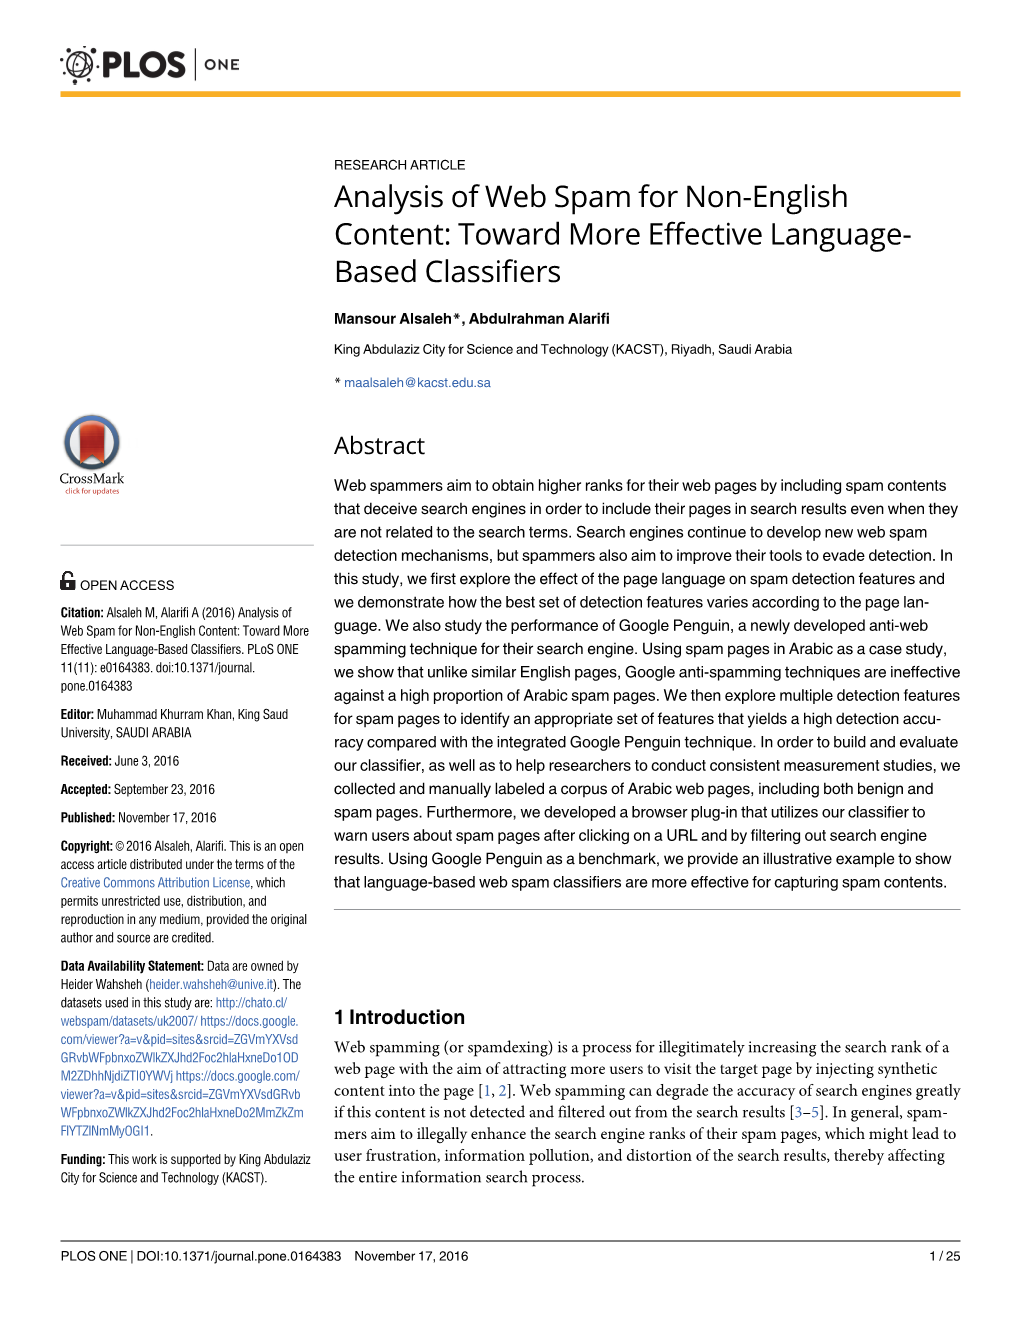 Analysis of Web Spam for Non-English Content: Toward More Effective Language- Based Classifiers